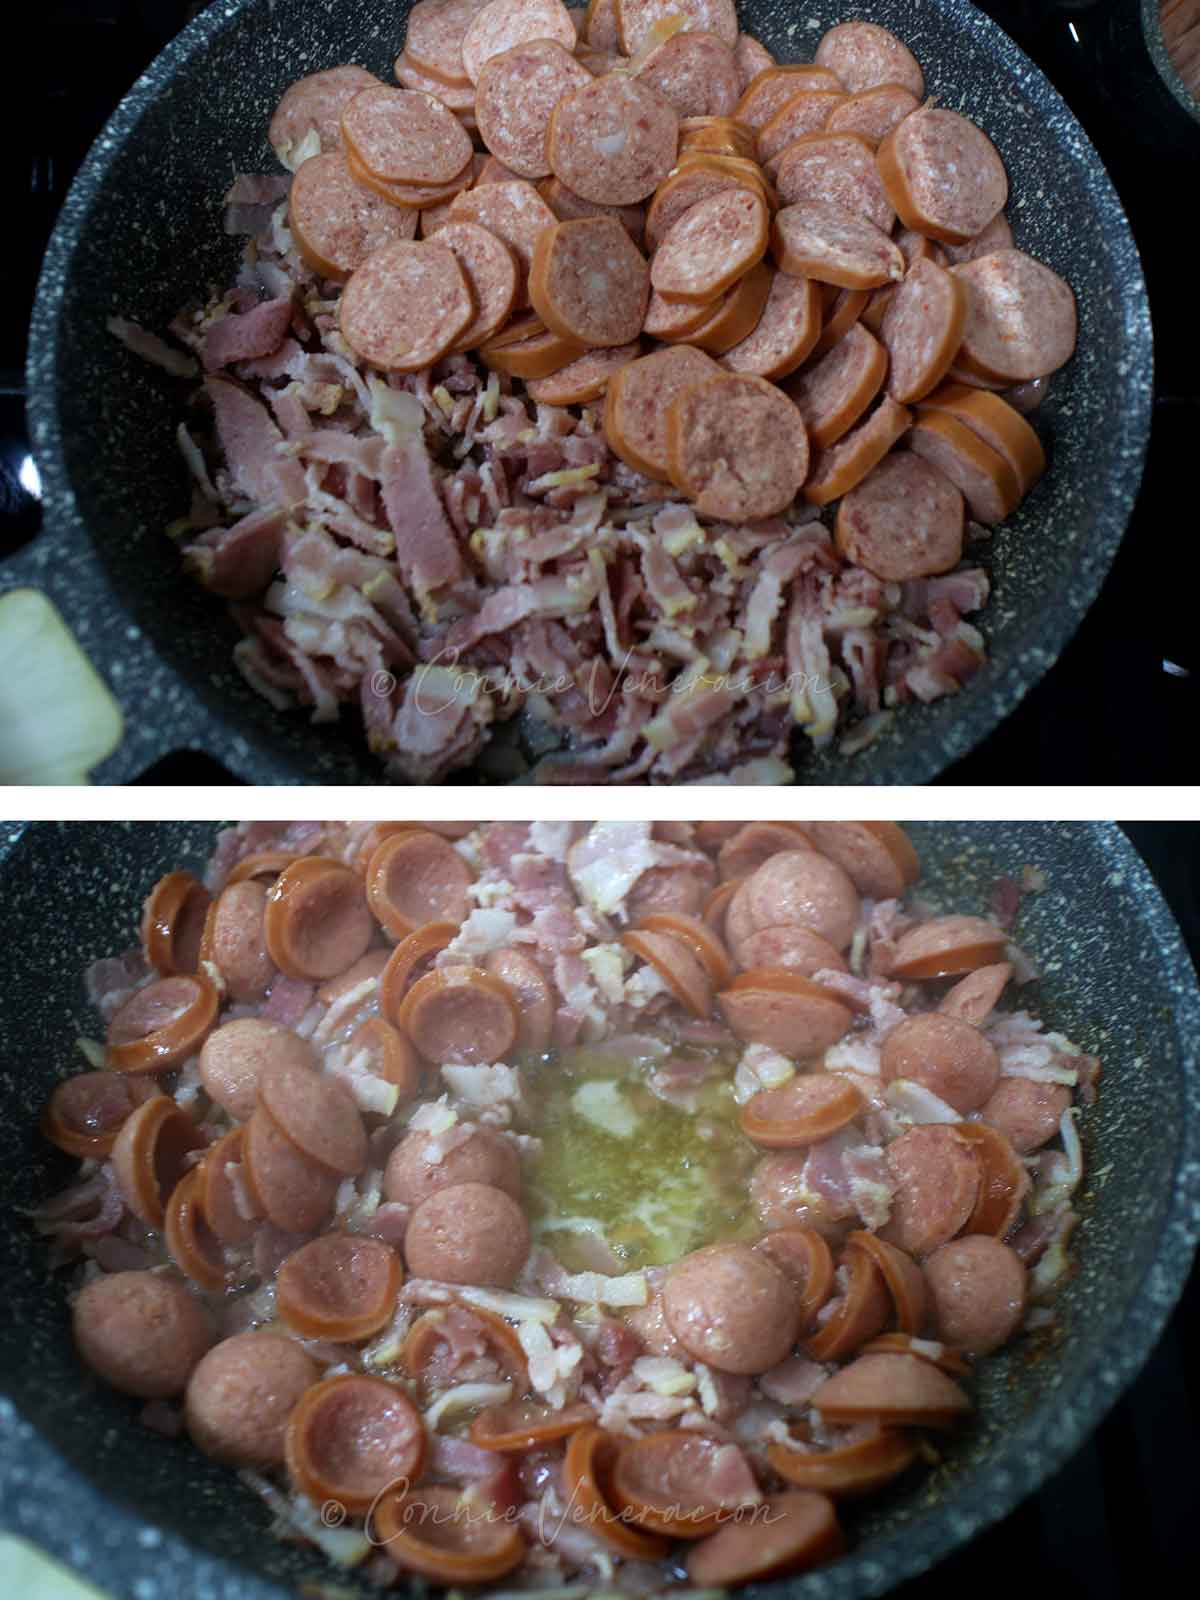 Rendering fat from bacon and sausages